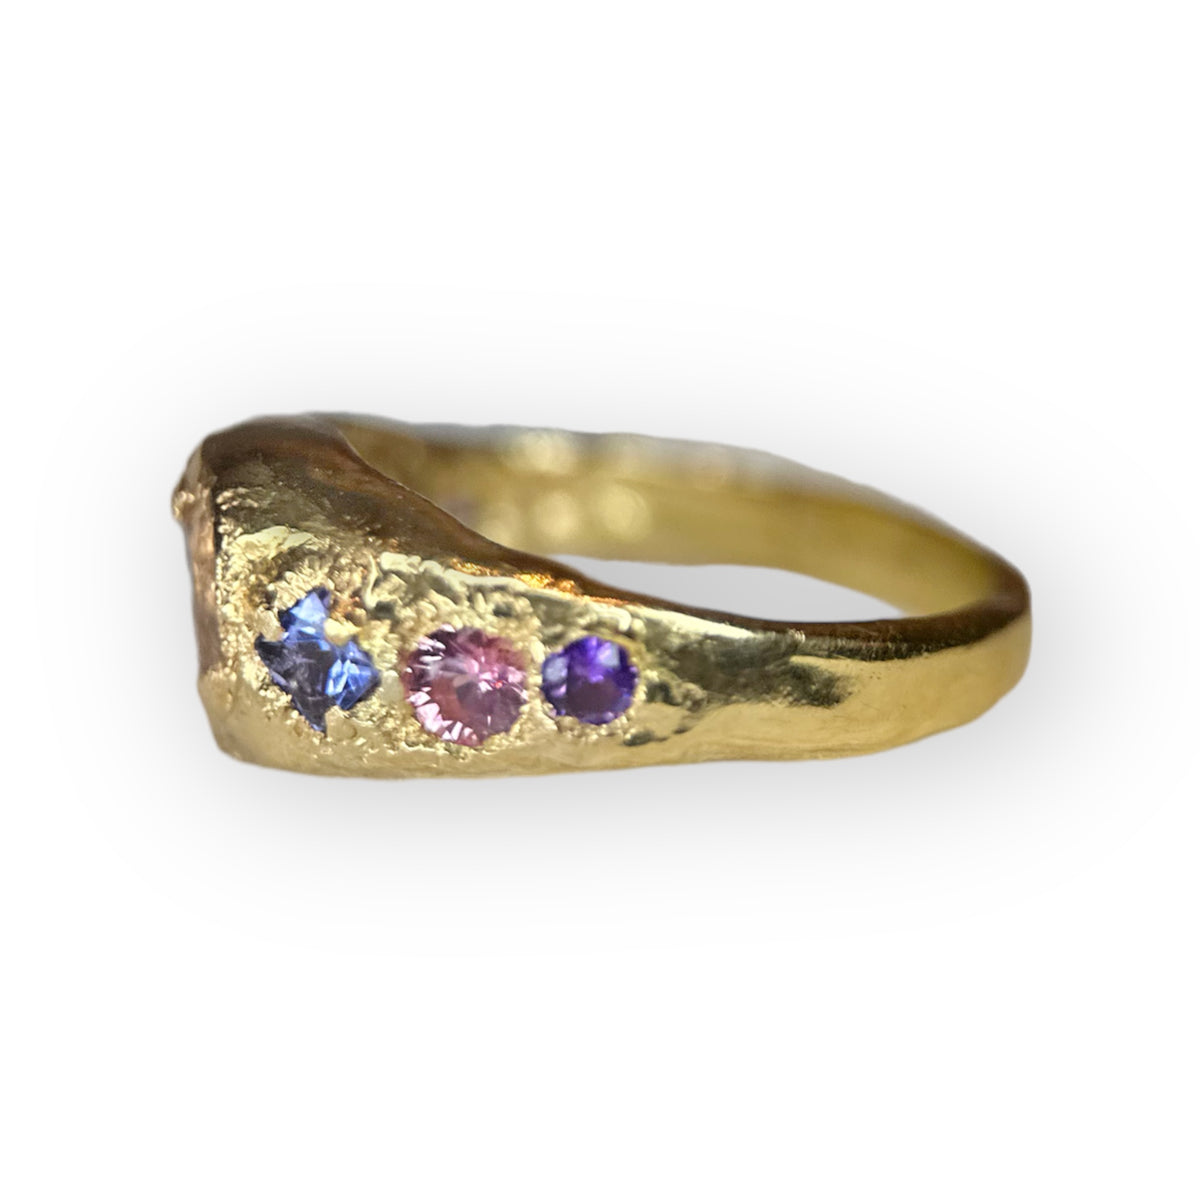 Pink Tourmaline Heart Ring “Cupids Love” 18 ct Gold (Exclusive to Tomfoolery London)